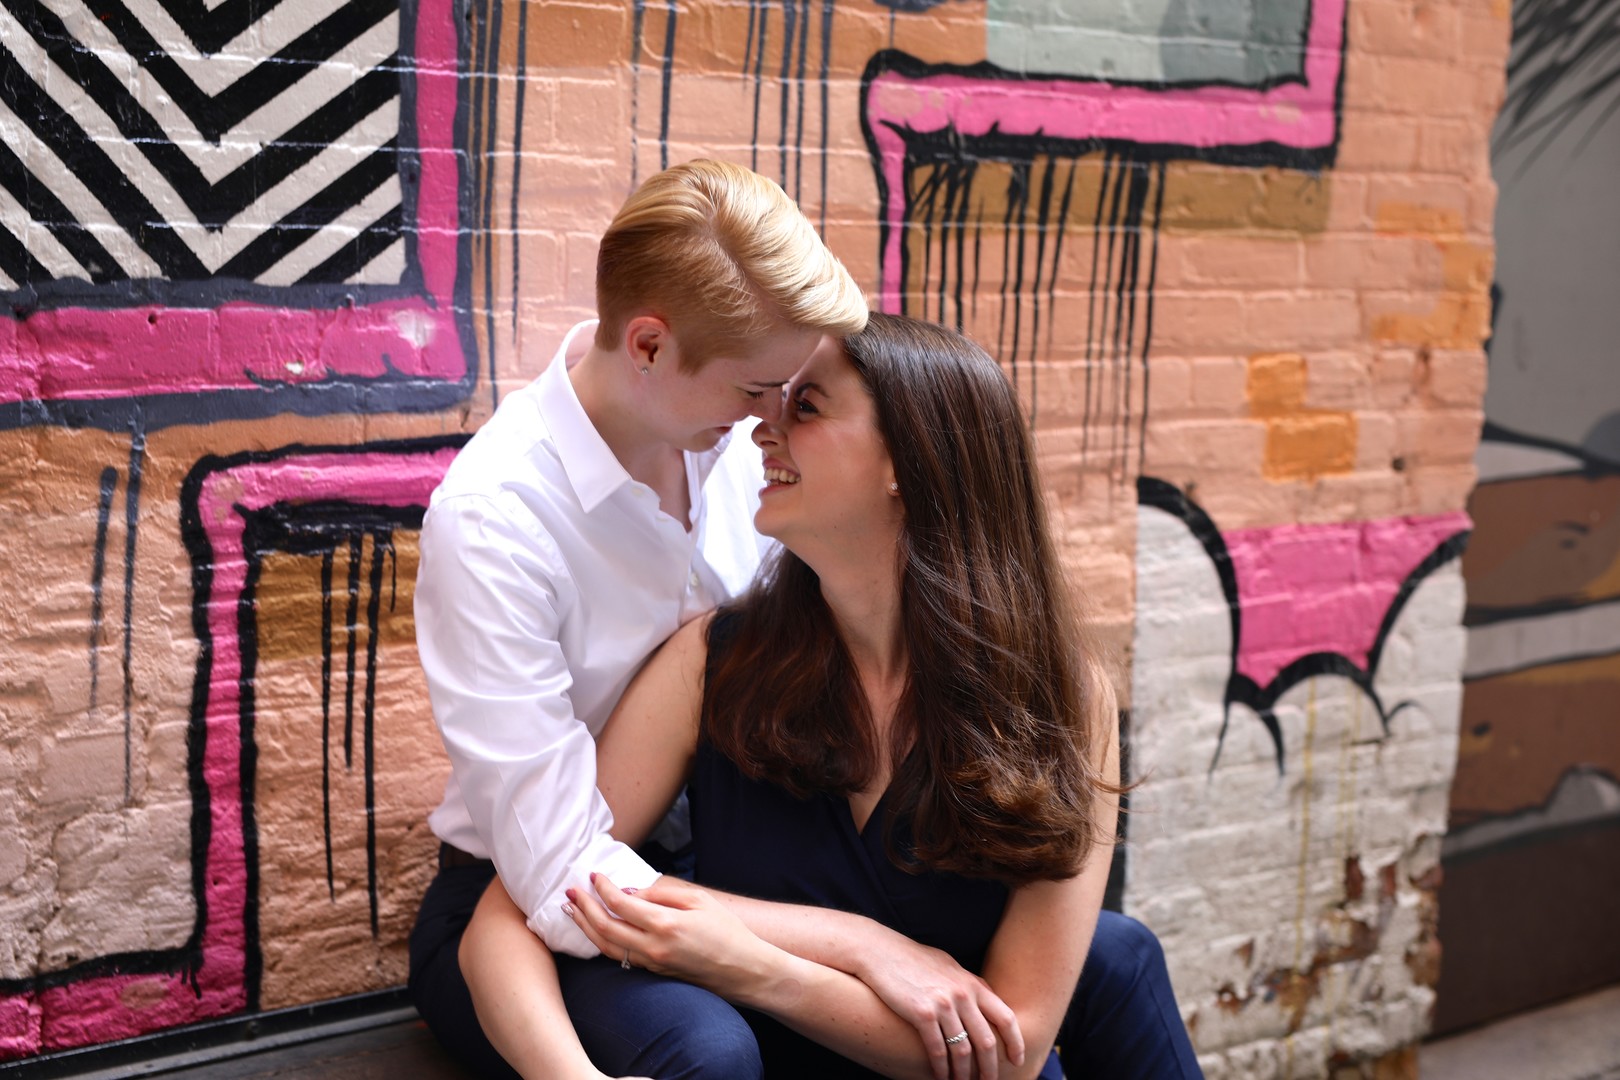 Colorful engagement photos in The Belt in Detroit, Michigan two brides LGBTQ downtown graffiti